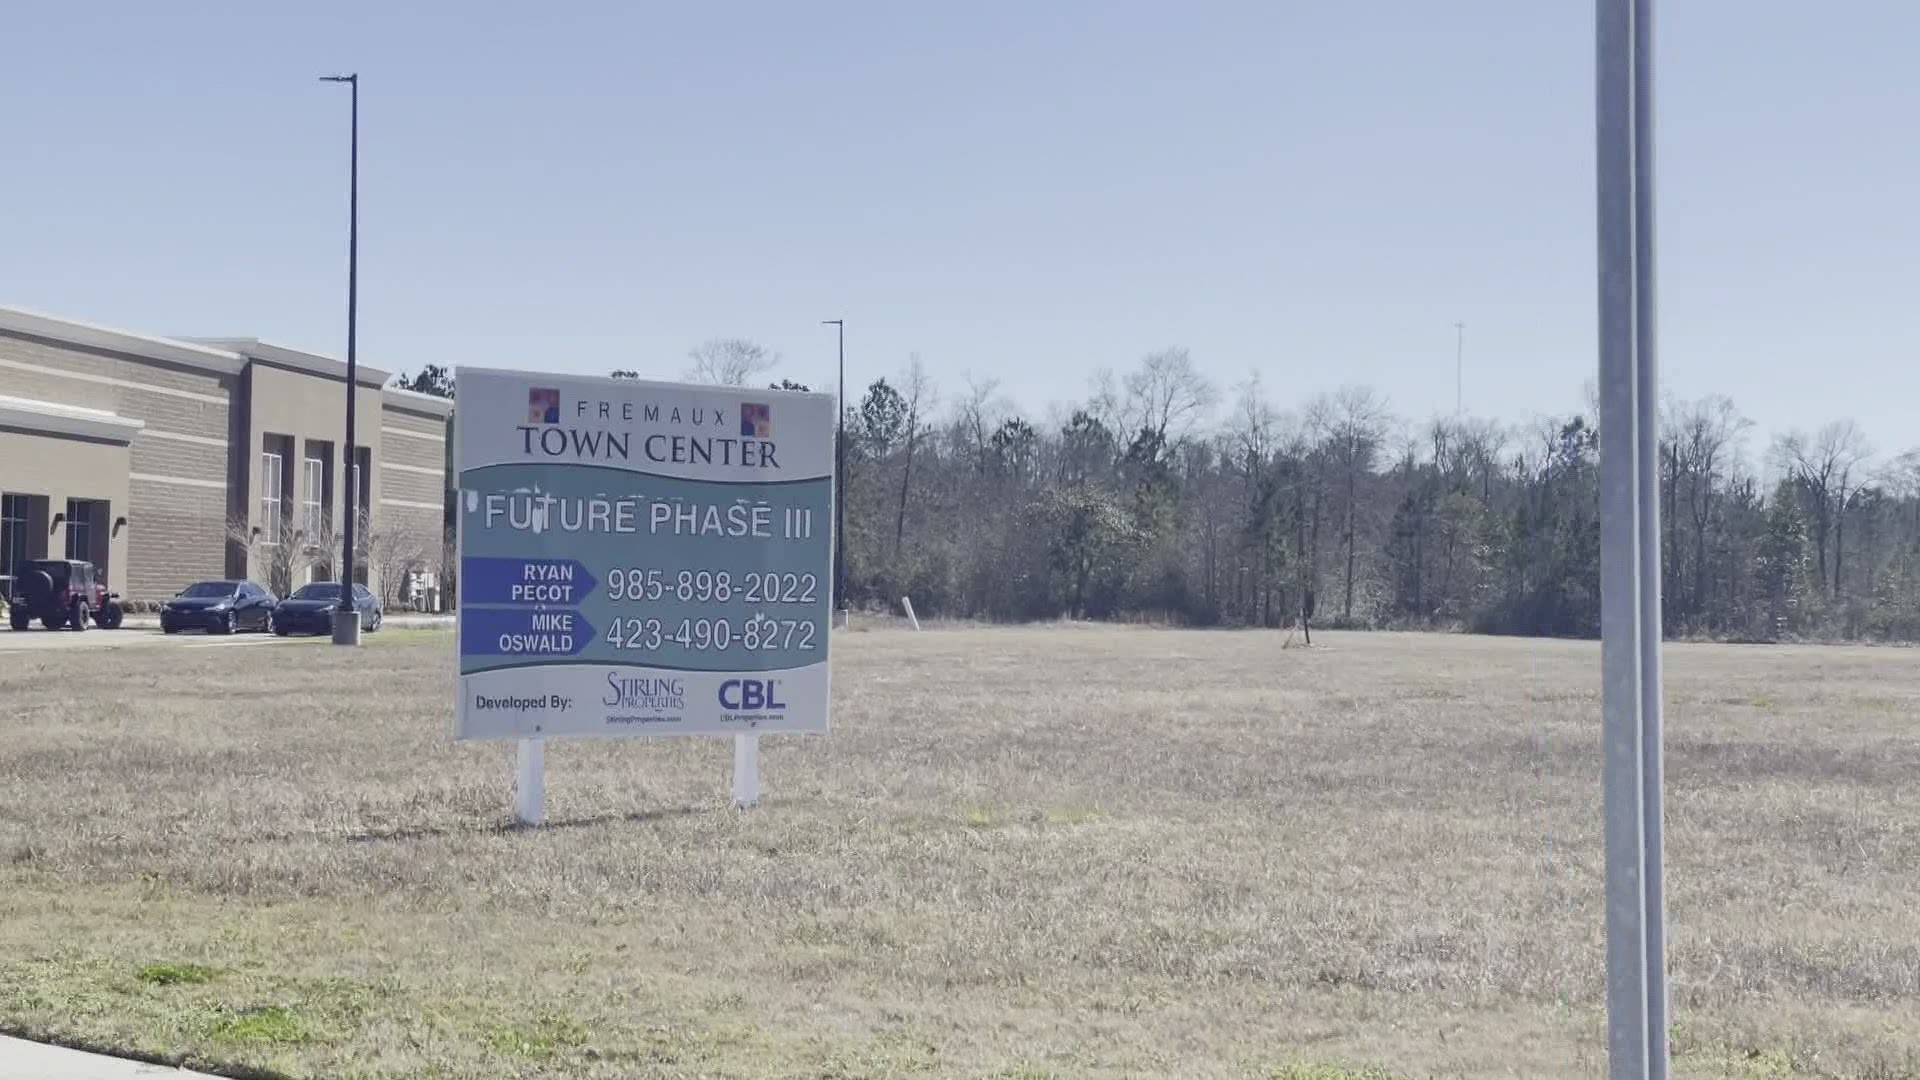 Slidell residents are welcoming of any new developments that are possibly coming to the area.